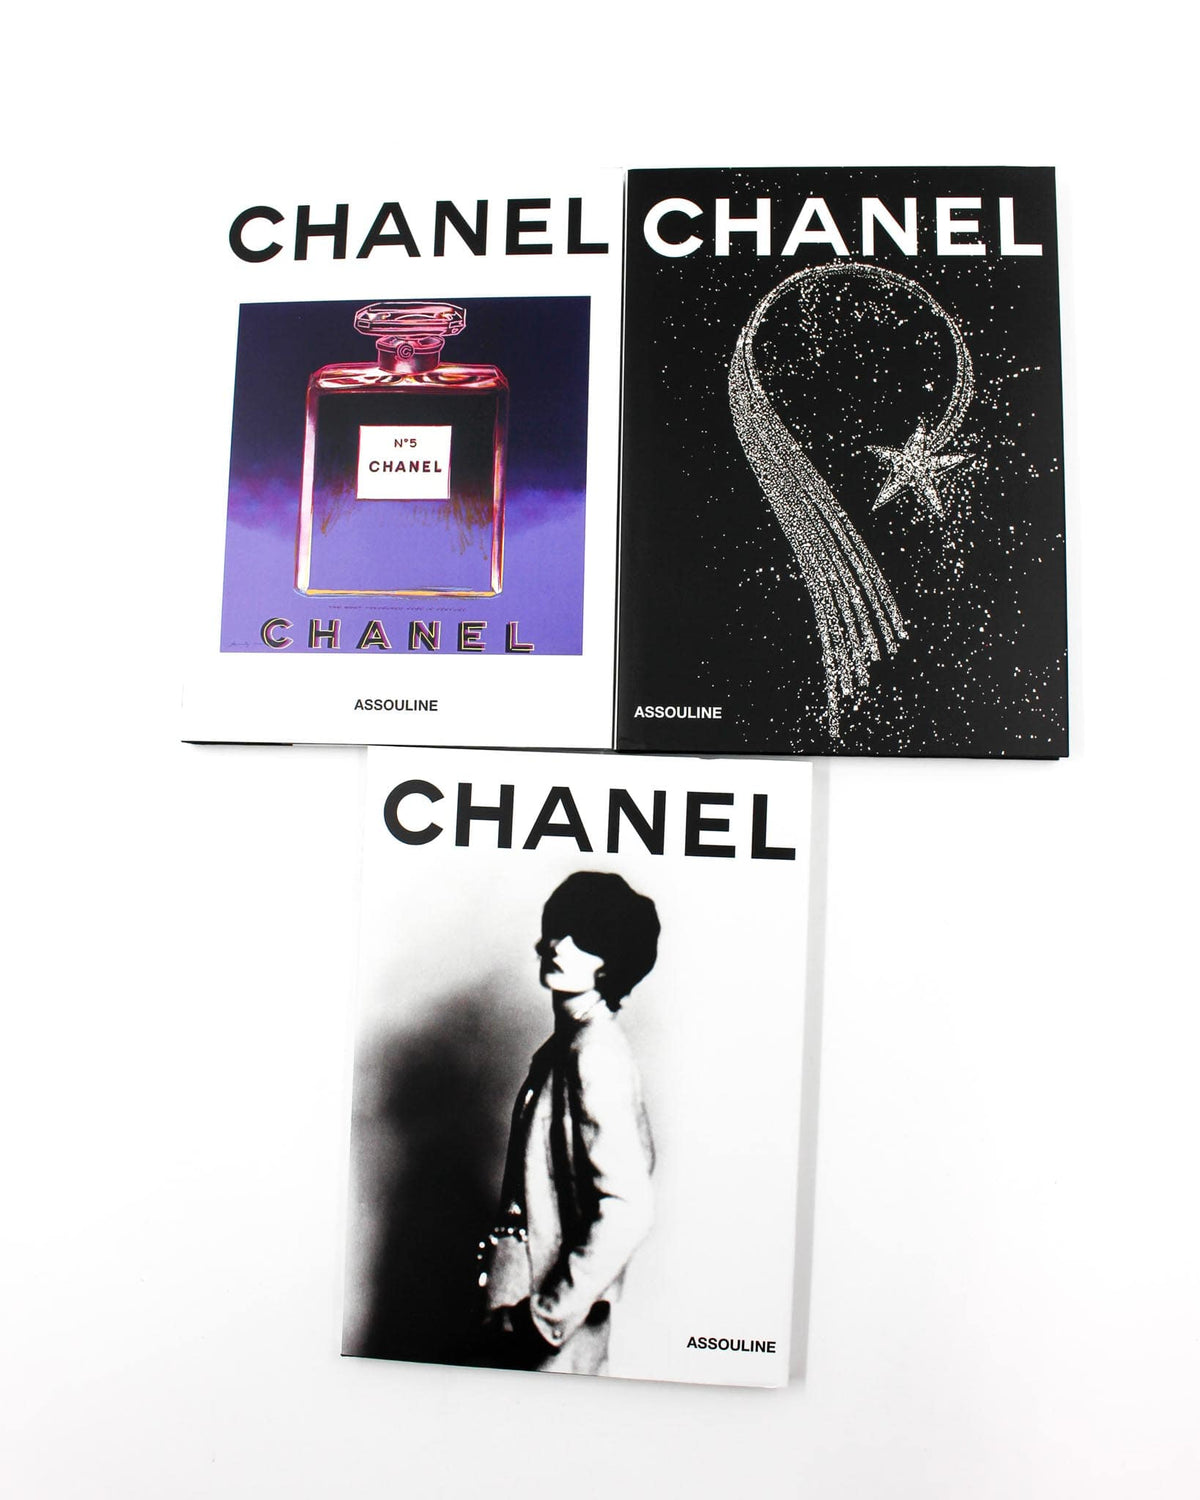 Chanel Trilogy Book Collection